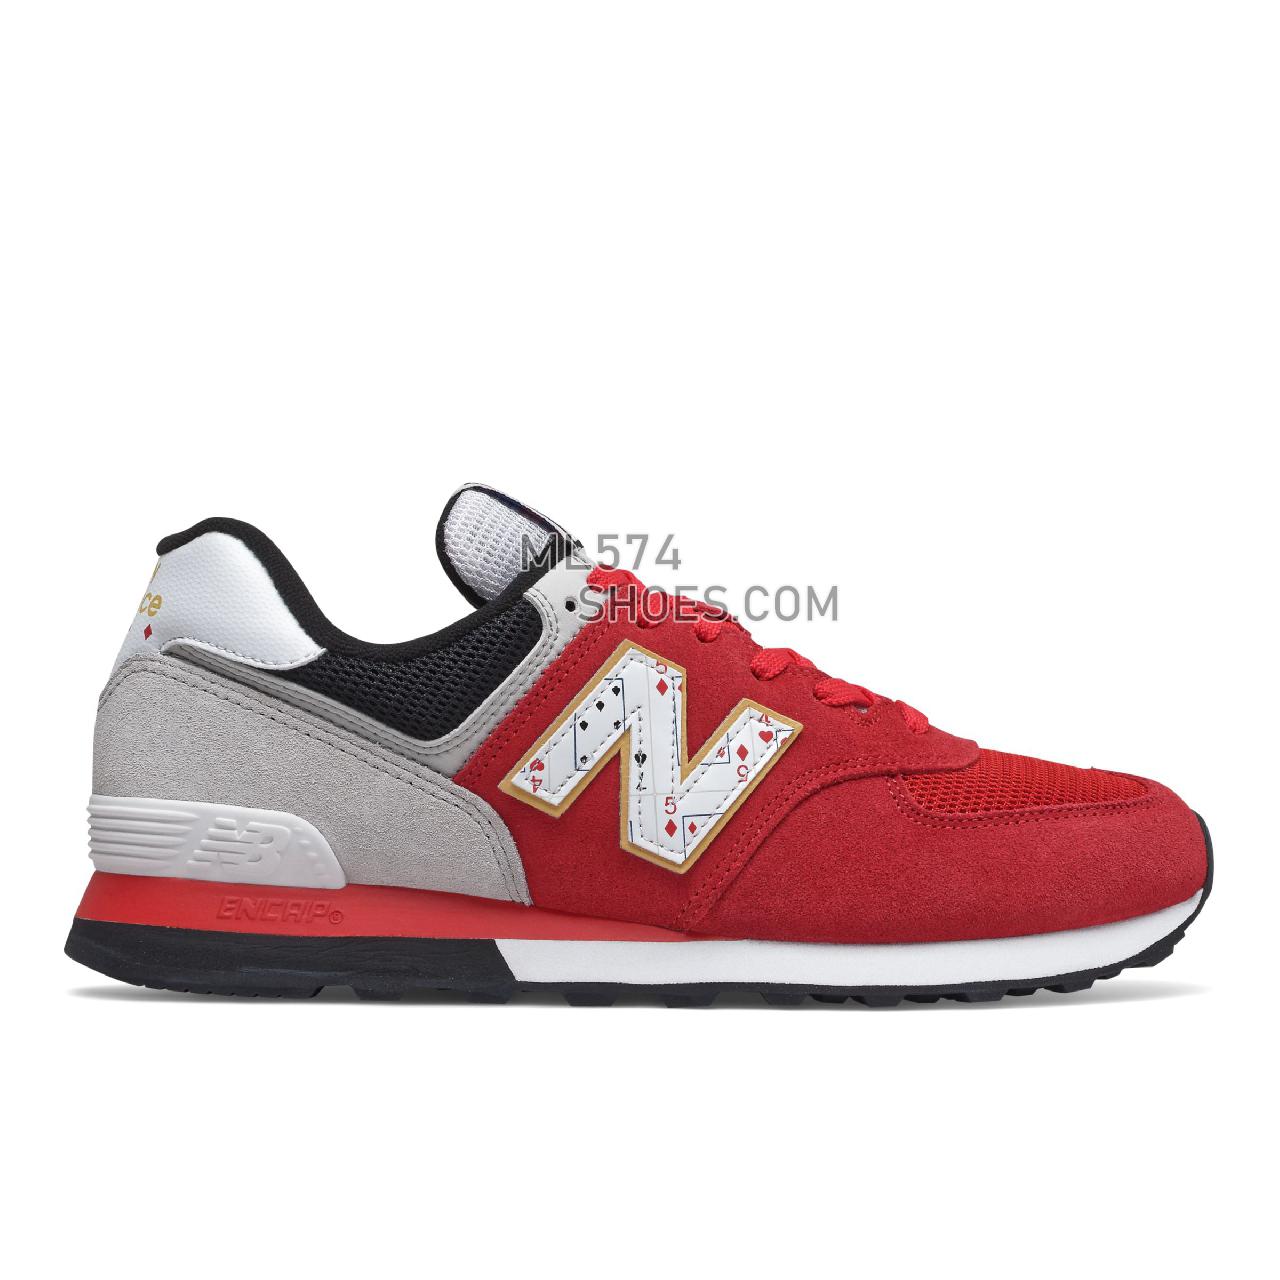 New Balance 574v2 - Men's Classic Sneakers - Red with Summer Fog - ML574WI2